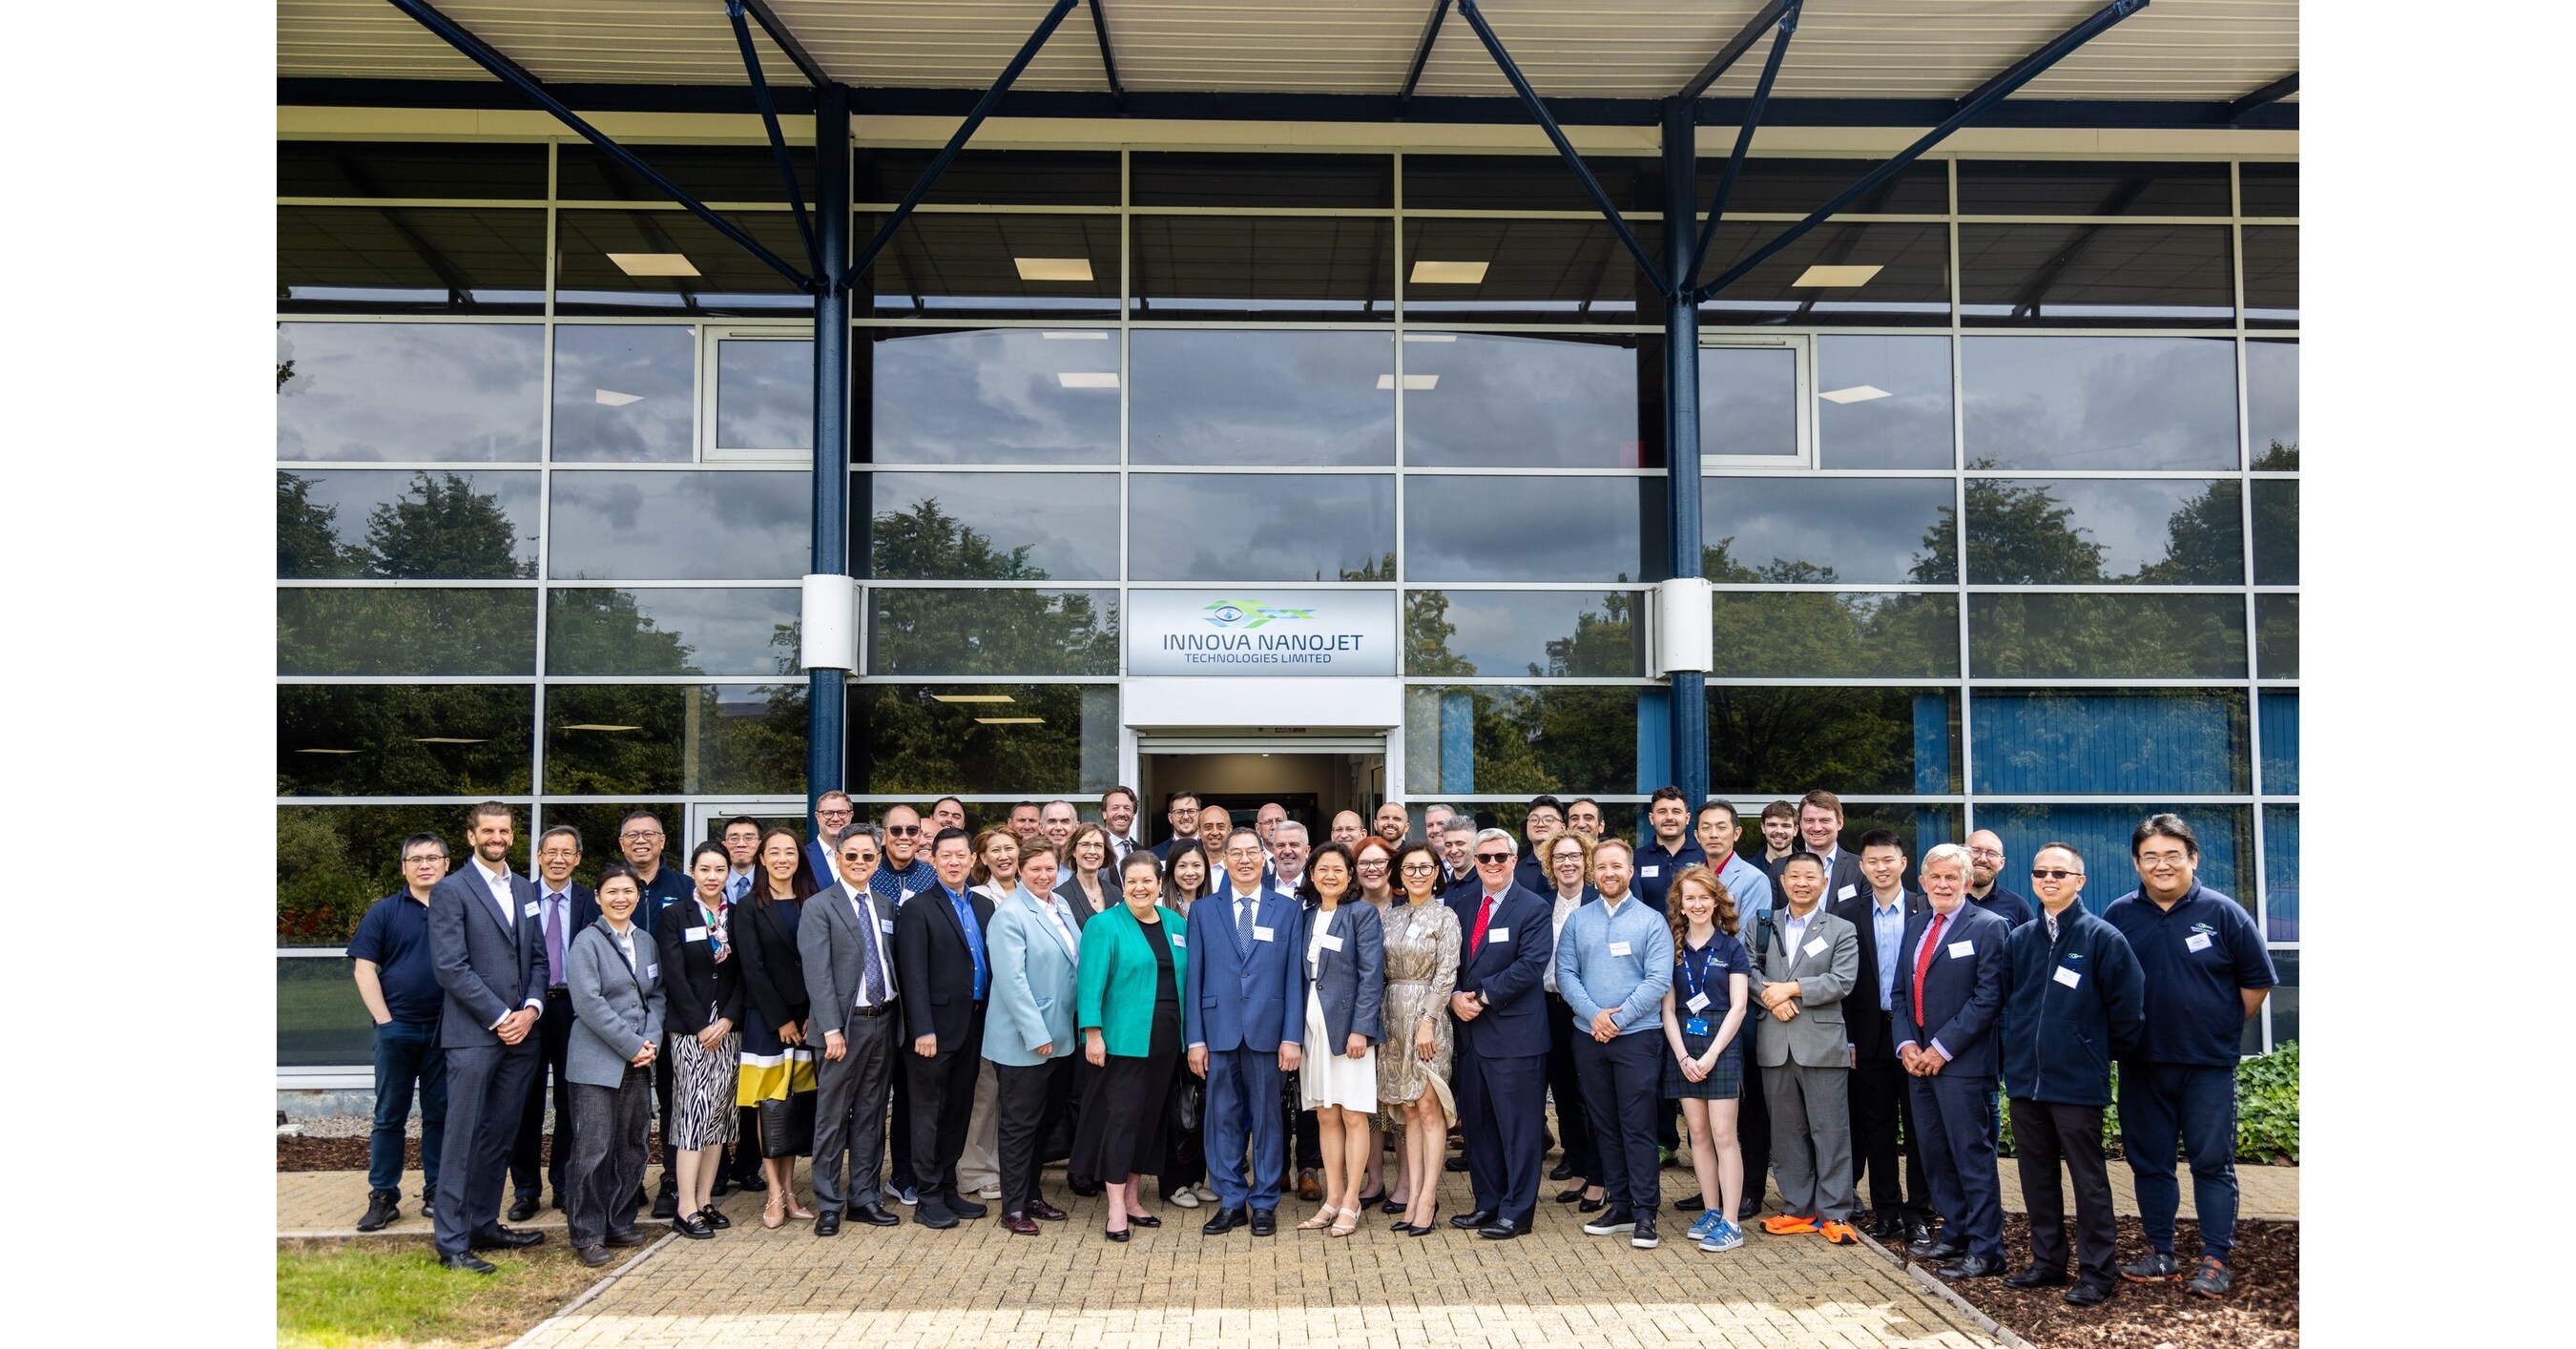 “Clean Air for Life” Innova NanoJet Technologies Opens its Production Facility in Scotland